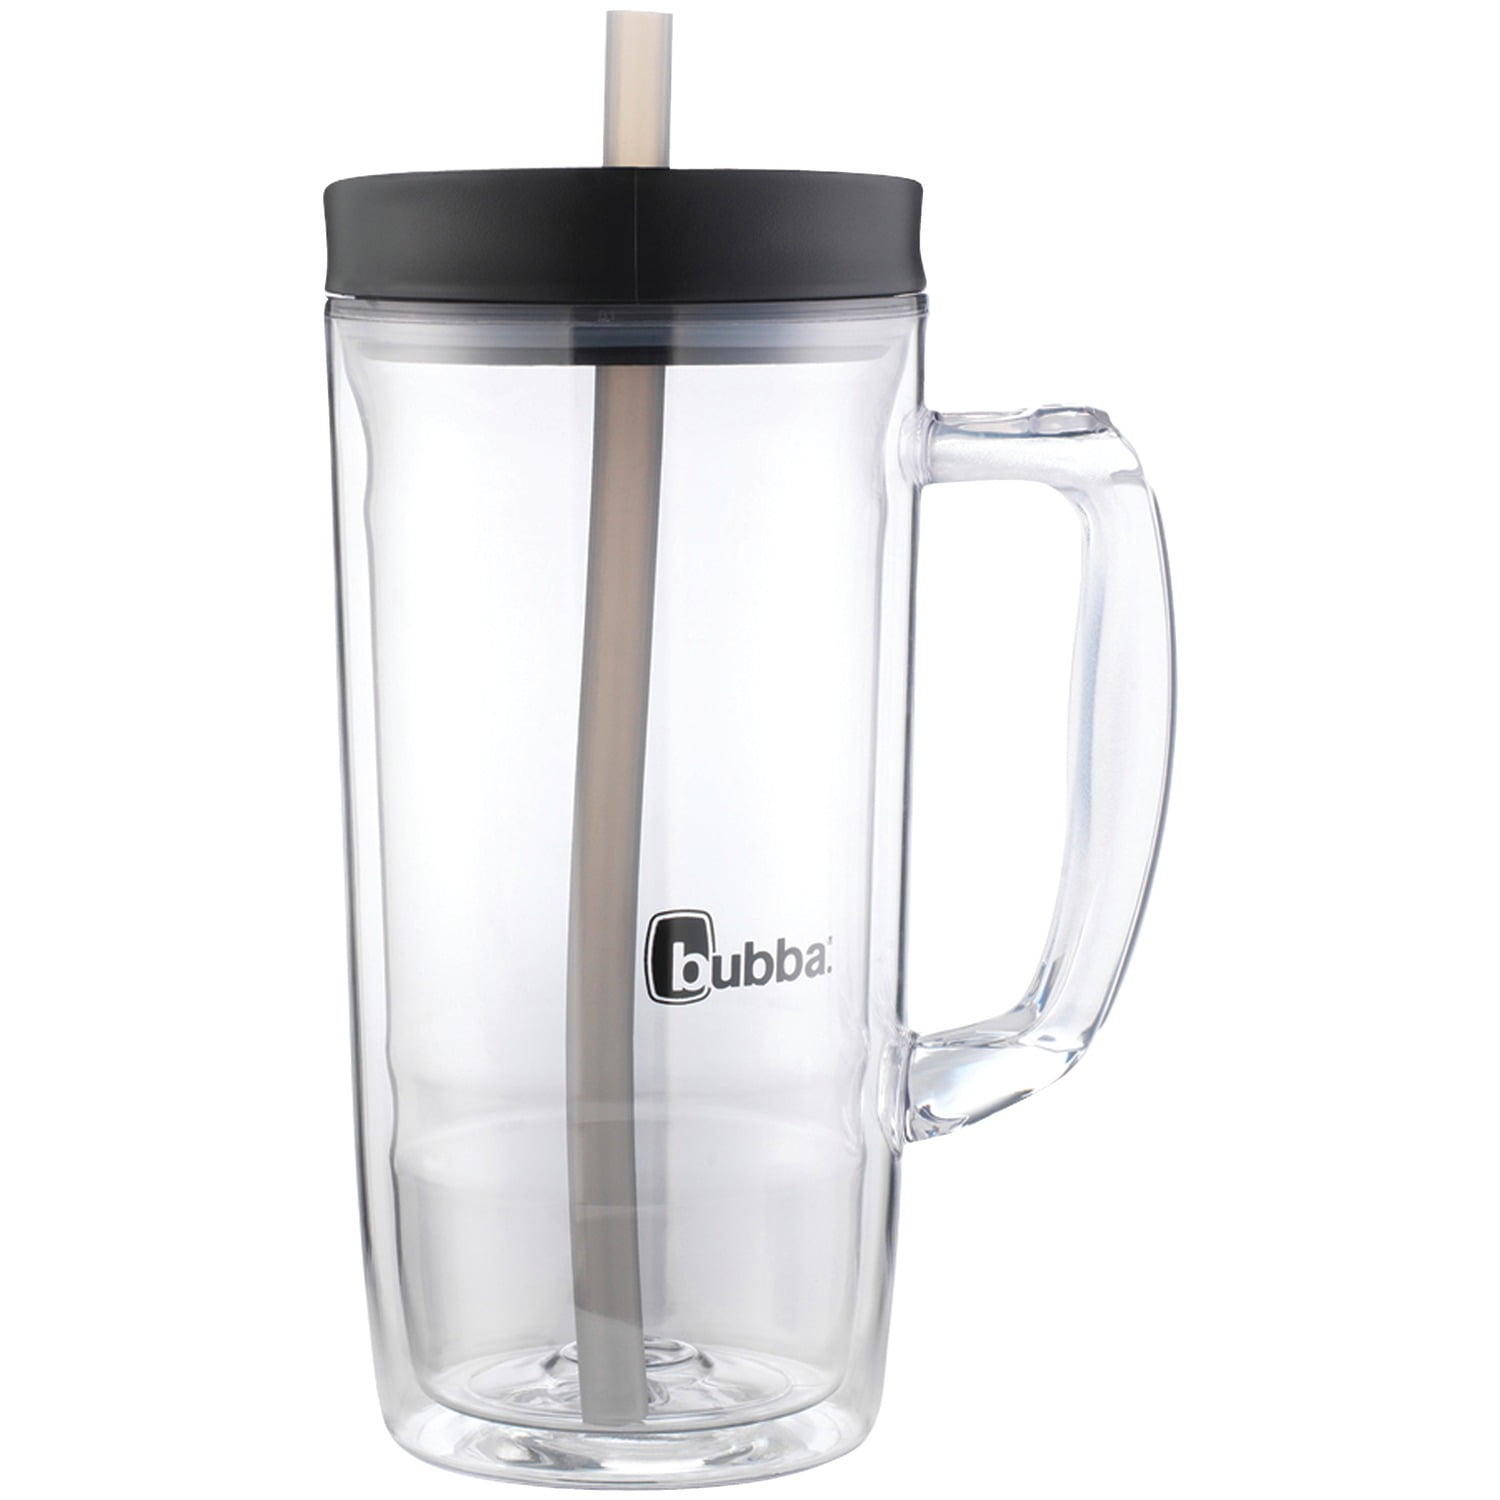 Bubba Envy 32 oz. Licorice Black Resin Mug with Straw 2148889 - The Home  Depot